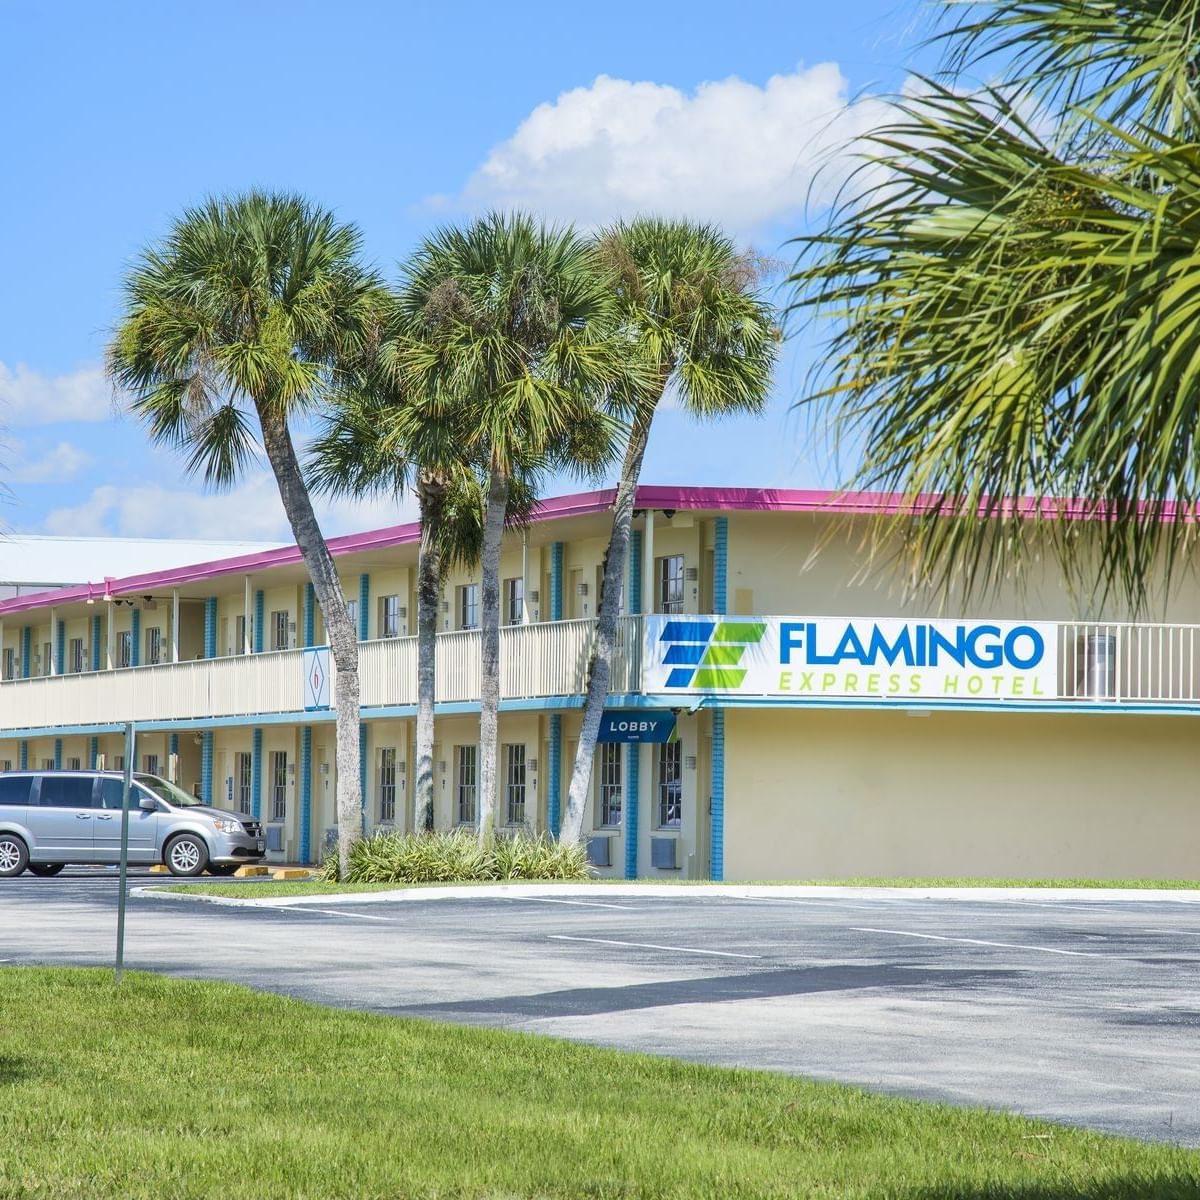 Exterior view of the parking area in Flamingo Express Hotel